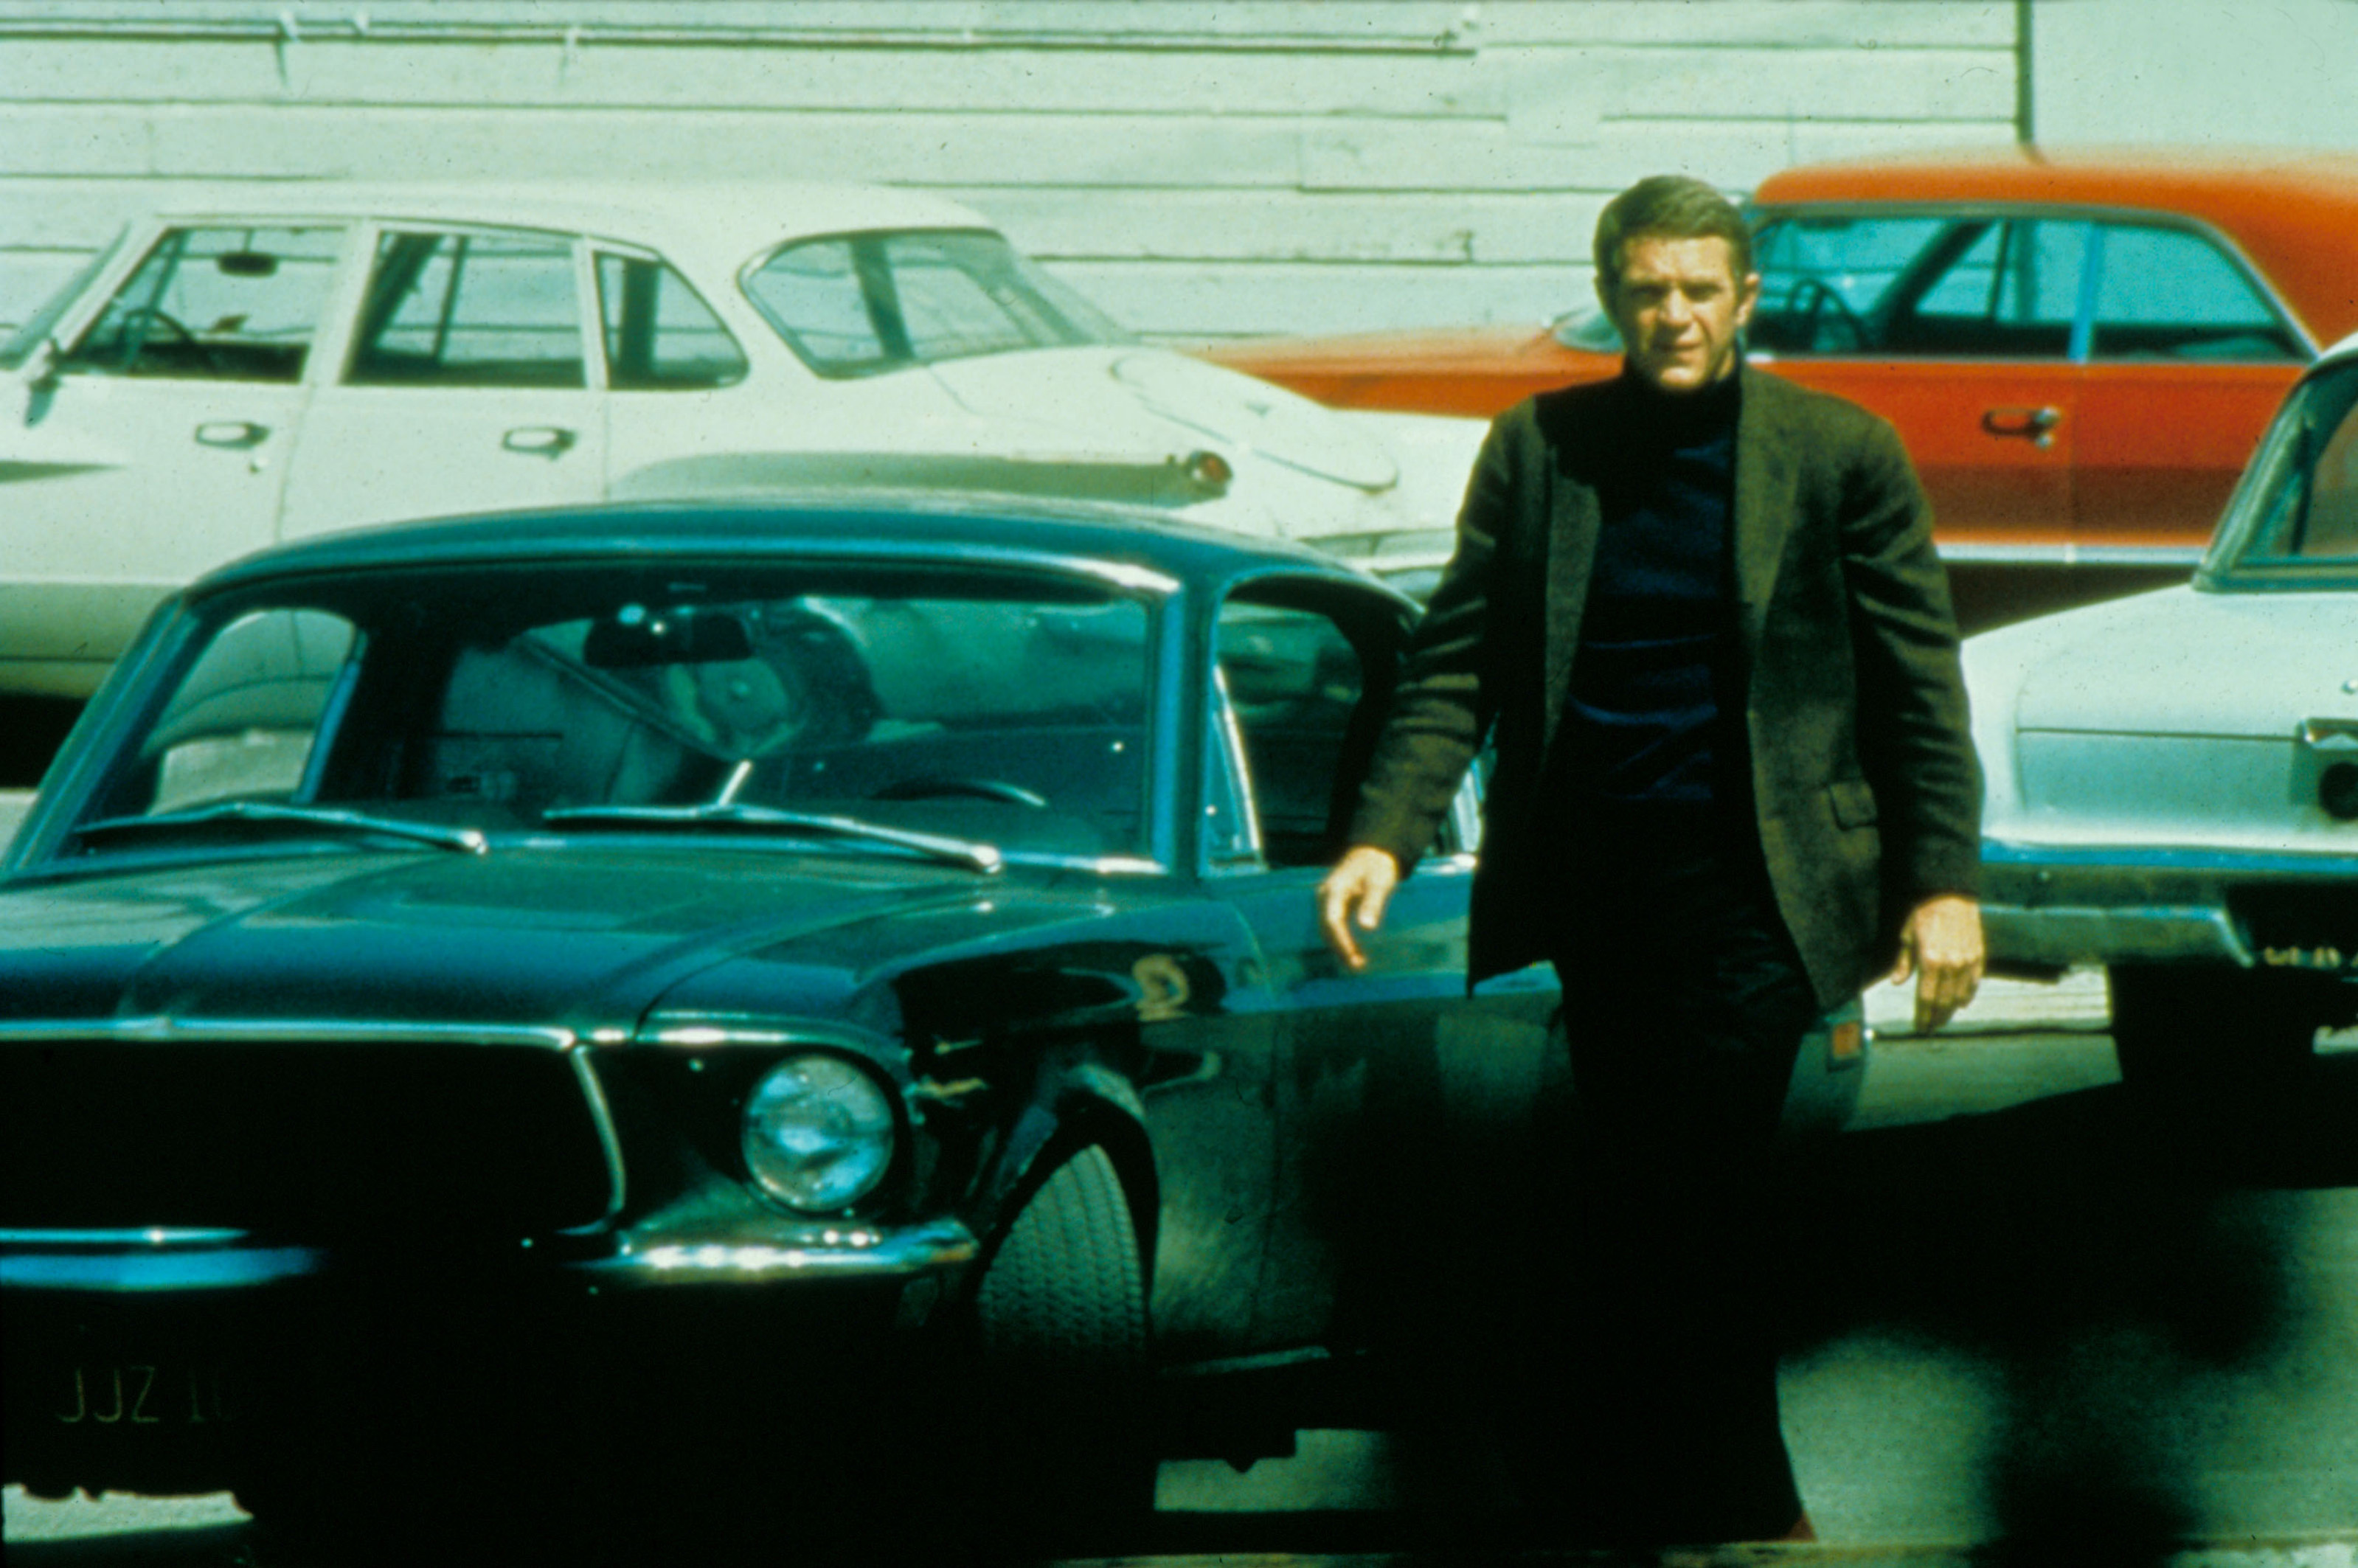 <p>Any vehicle driven, ridden, or stood next to by Steve McQueen was considered cool. But, the Highland Green 68 Ford Mustang GT 390 in <i>Bullitt </i>didn't need much help. The chase scenes on the public streets of San Francisco are some of the best ever recorded on film. Plus, the stripped-down look of the movie's Mustangs made them meaner-looking in the film.</p> <p>The original magnesium American Racing Torque Thrust wheels help to give McQueen's car its aggressive stance. The GT 390 was transcended into a cult movie status, becoming an icon when the company makes a limited edition version twice.</p>